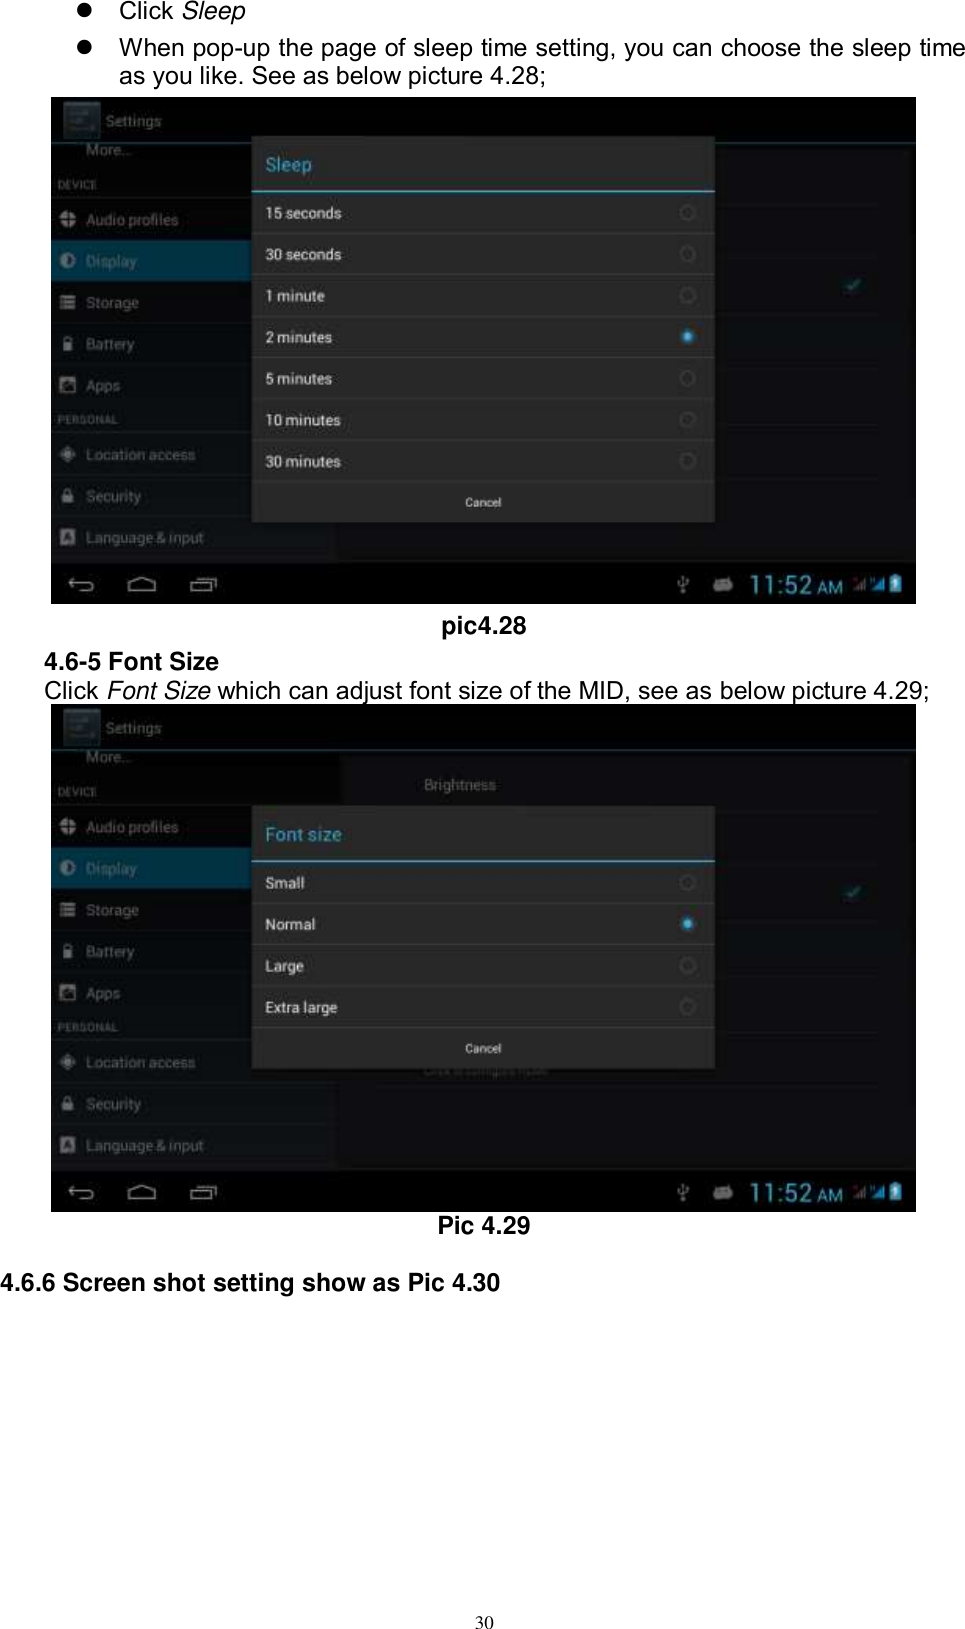      30   Click Sleep   When pop-up the page of sleep time setting, you can choose the sleep time as you like. See as below picture 4.28;  pic4.28 4.6-5 Font Size Click Font Size which can adjust font size of the MID, see as below picture 4.29;  Pic 4.29  4.6.6 Screen shot setting show as Pic 4.30 